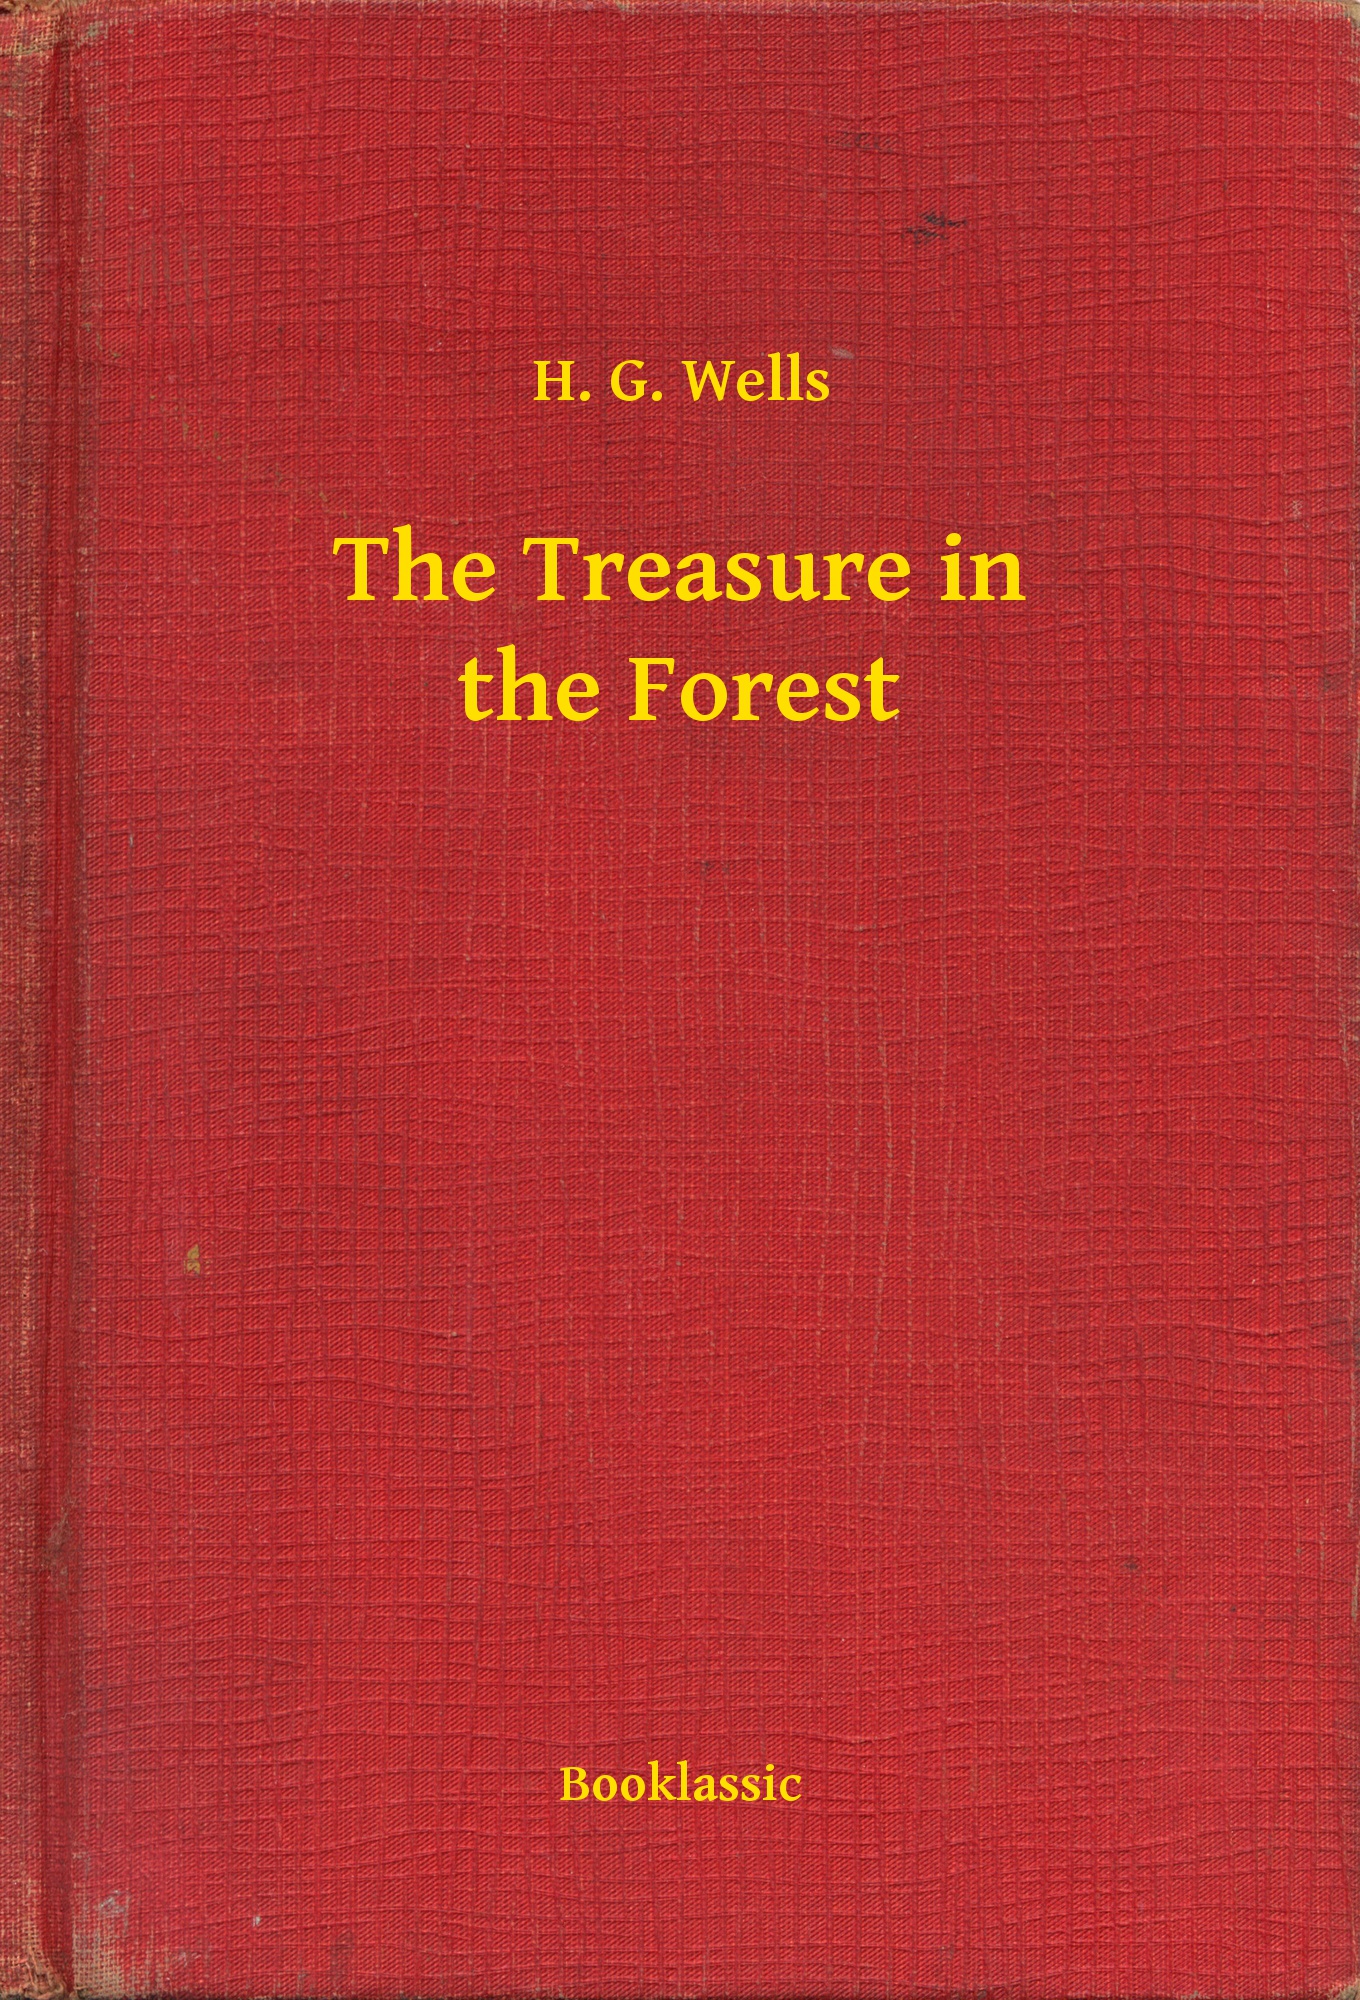 The Treasure in the Forest